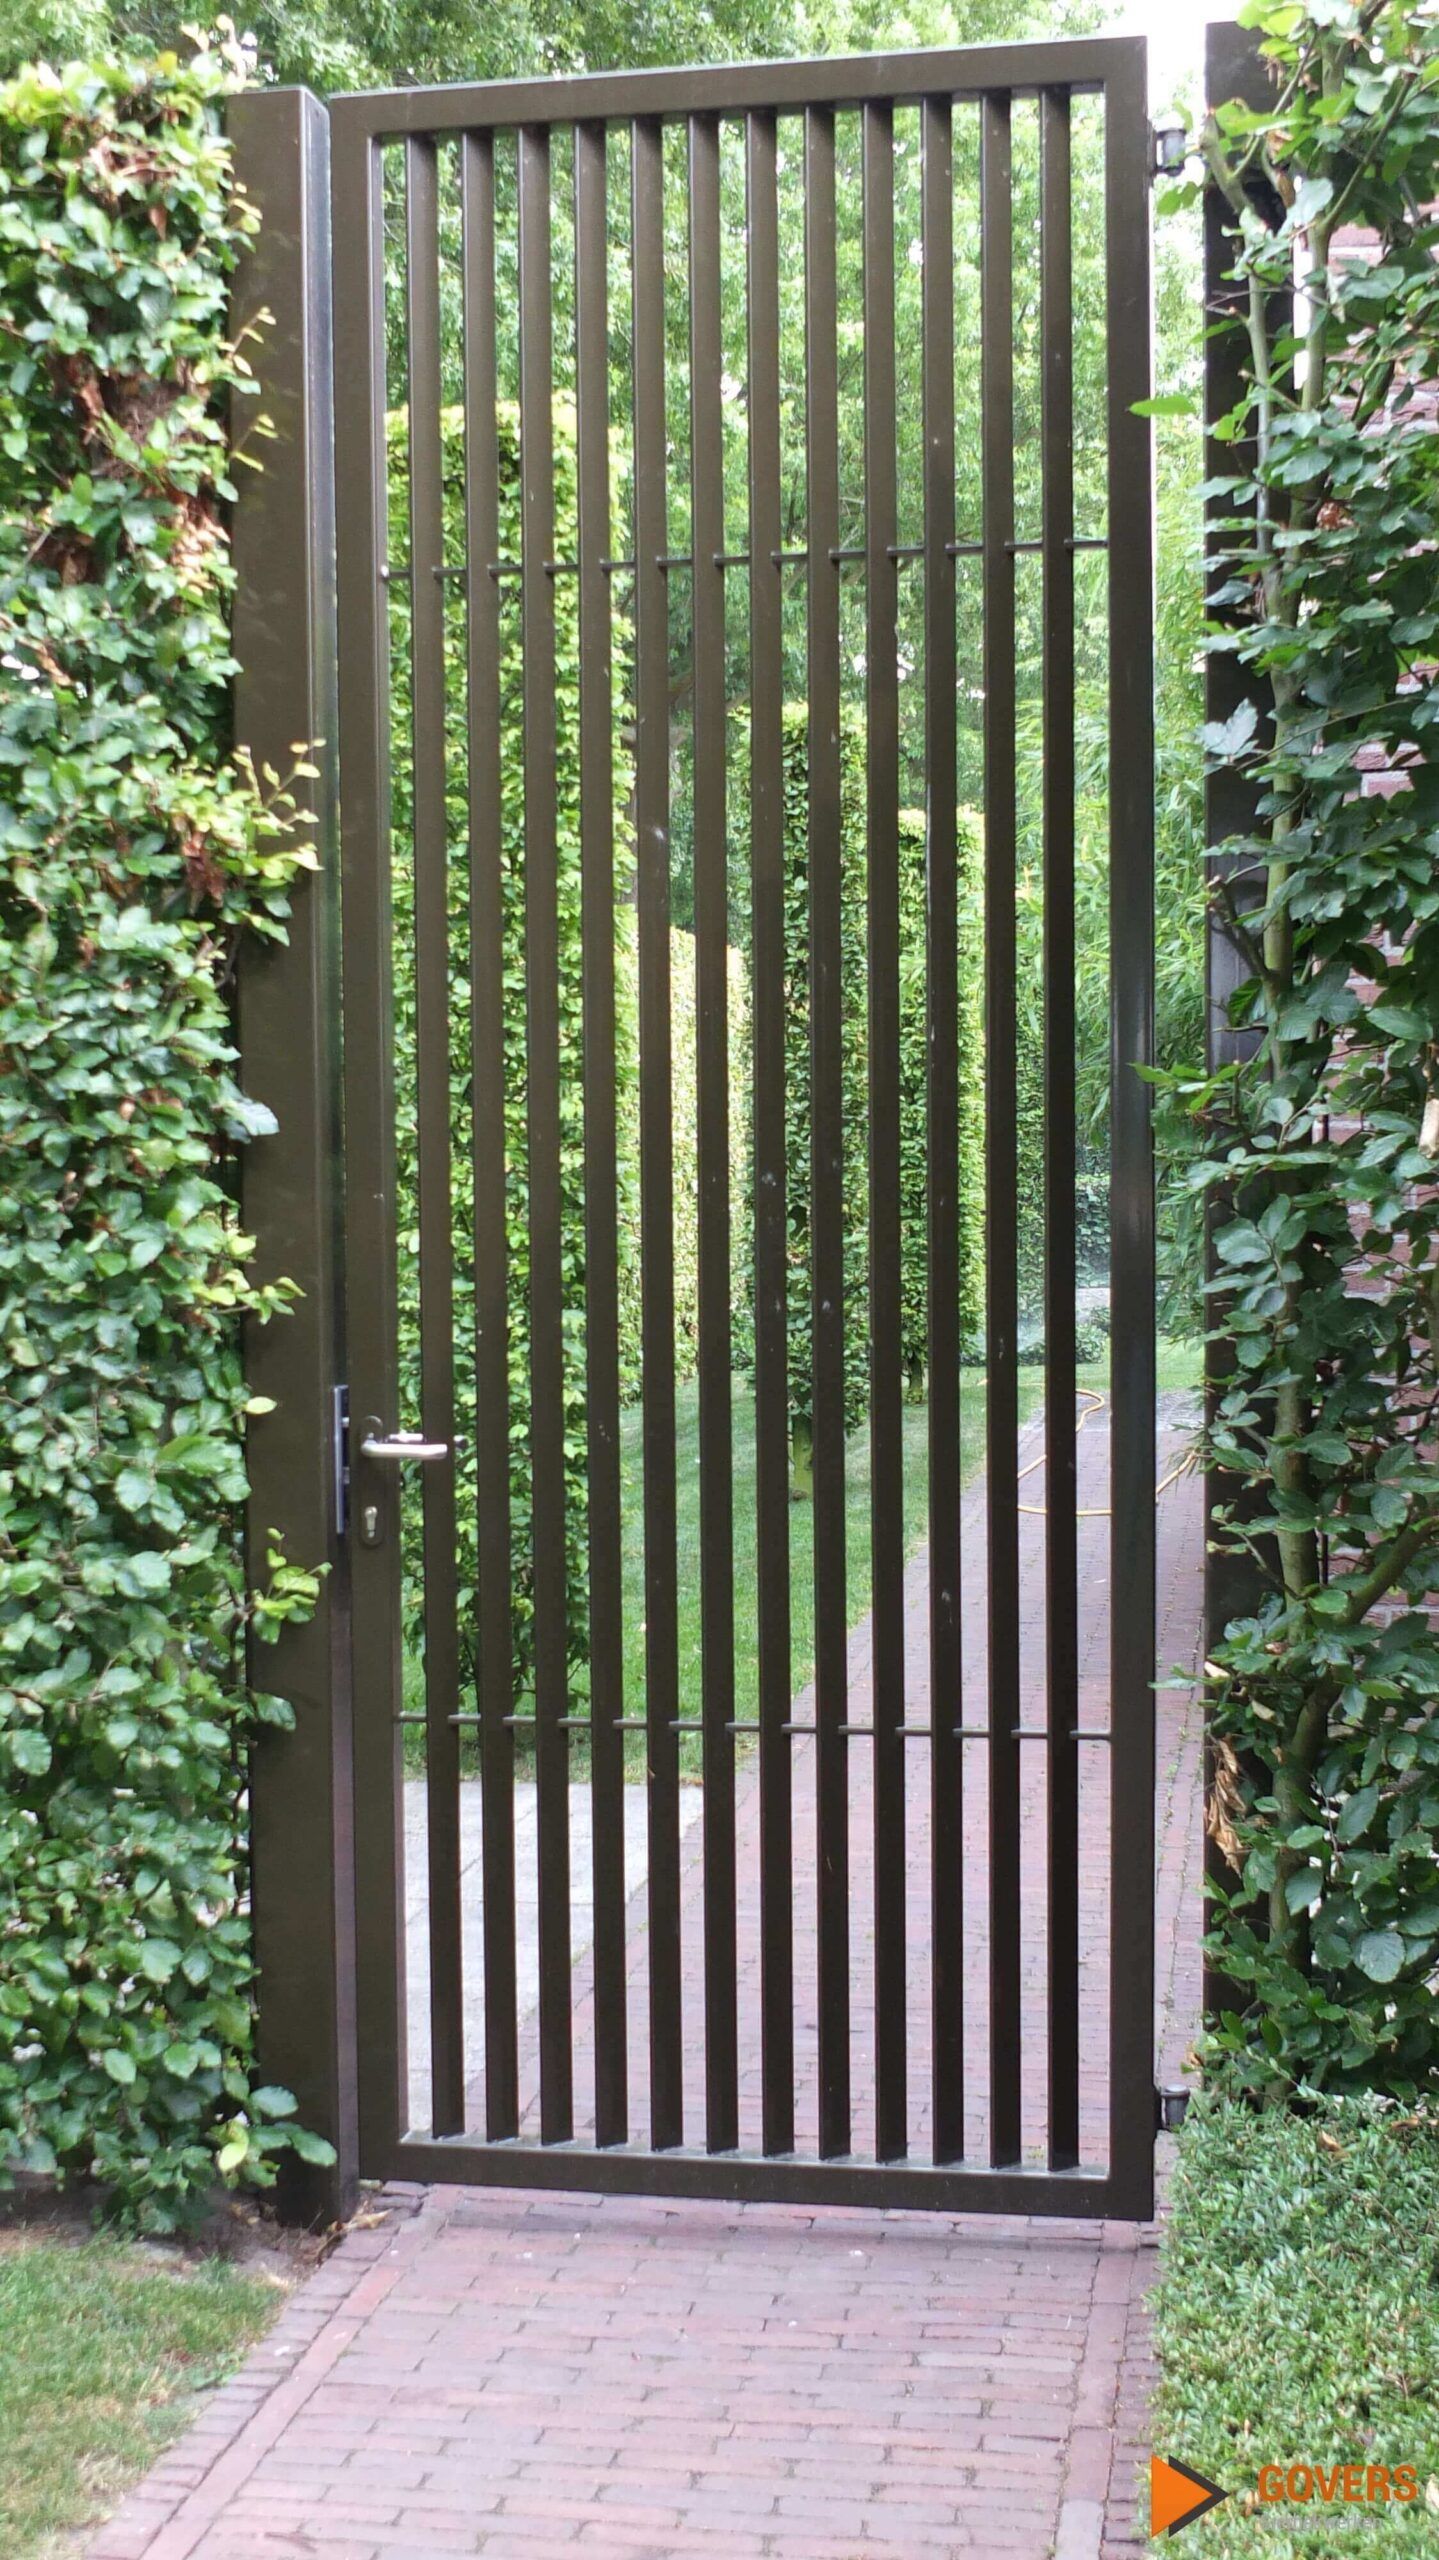 Enhance Your Property: Fence Gate Designs That Add Style and Security